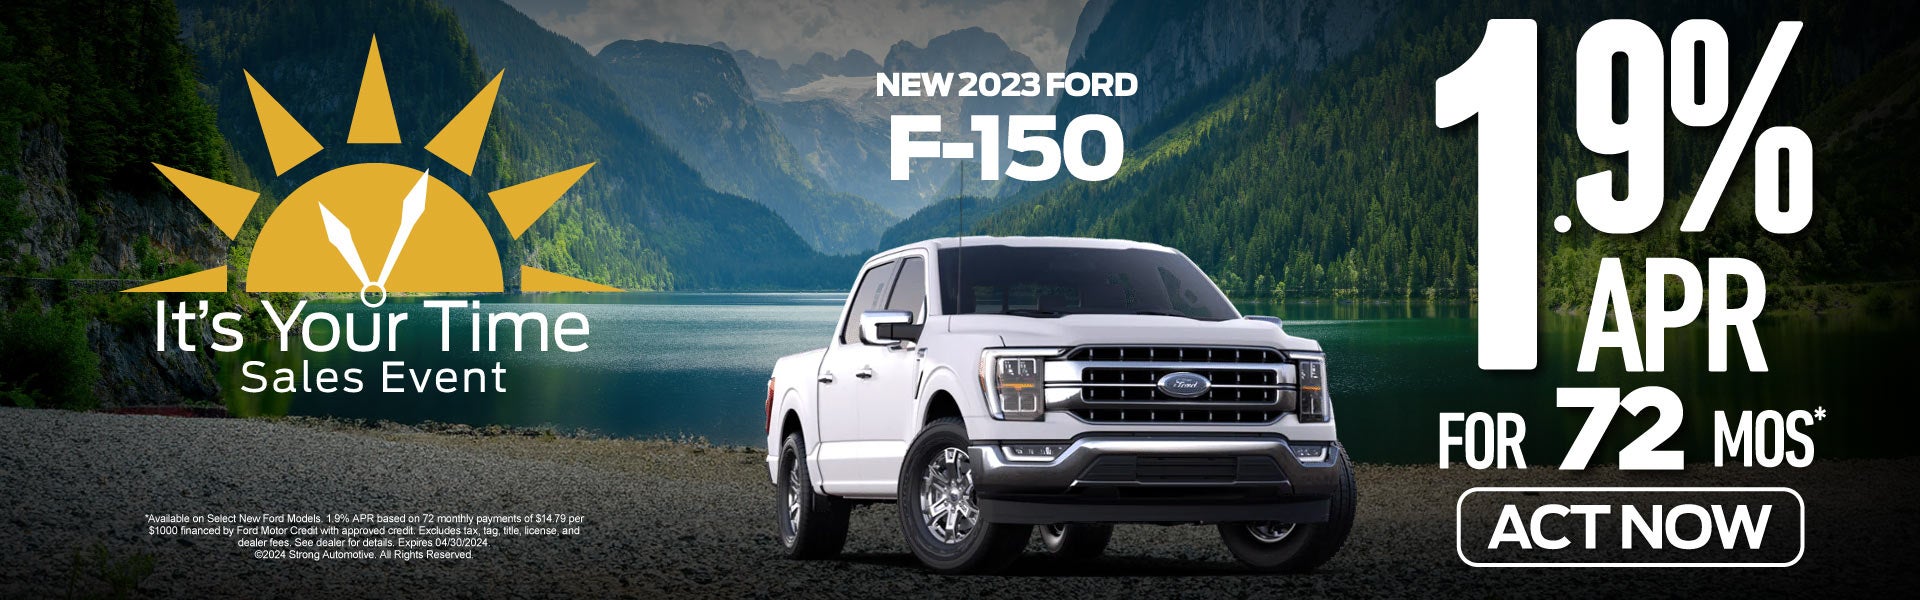 2023 Ford f-150 1.9% apr for 72 mos. - act now